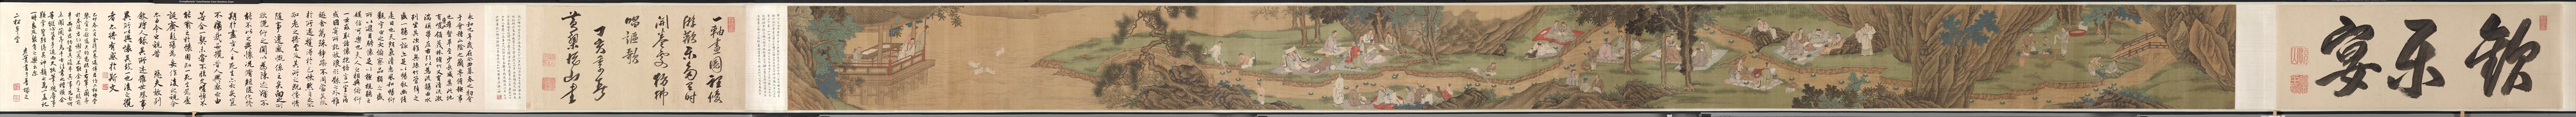 Purification at the Orchid Pavilion, 1671. Creator: Fan Yi (Chinese, c. 1615-before 1688).